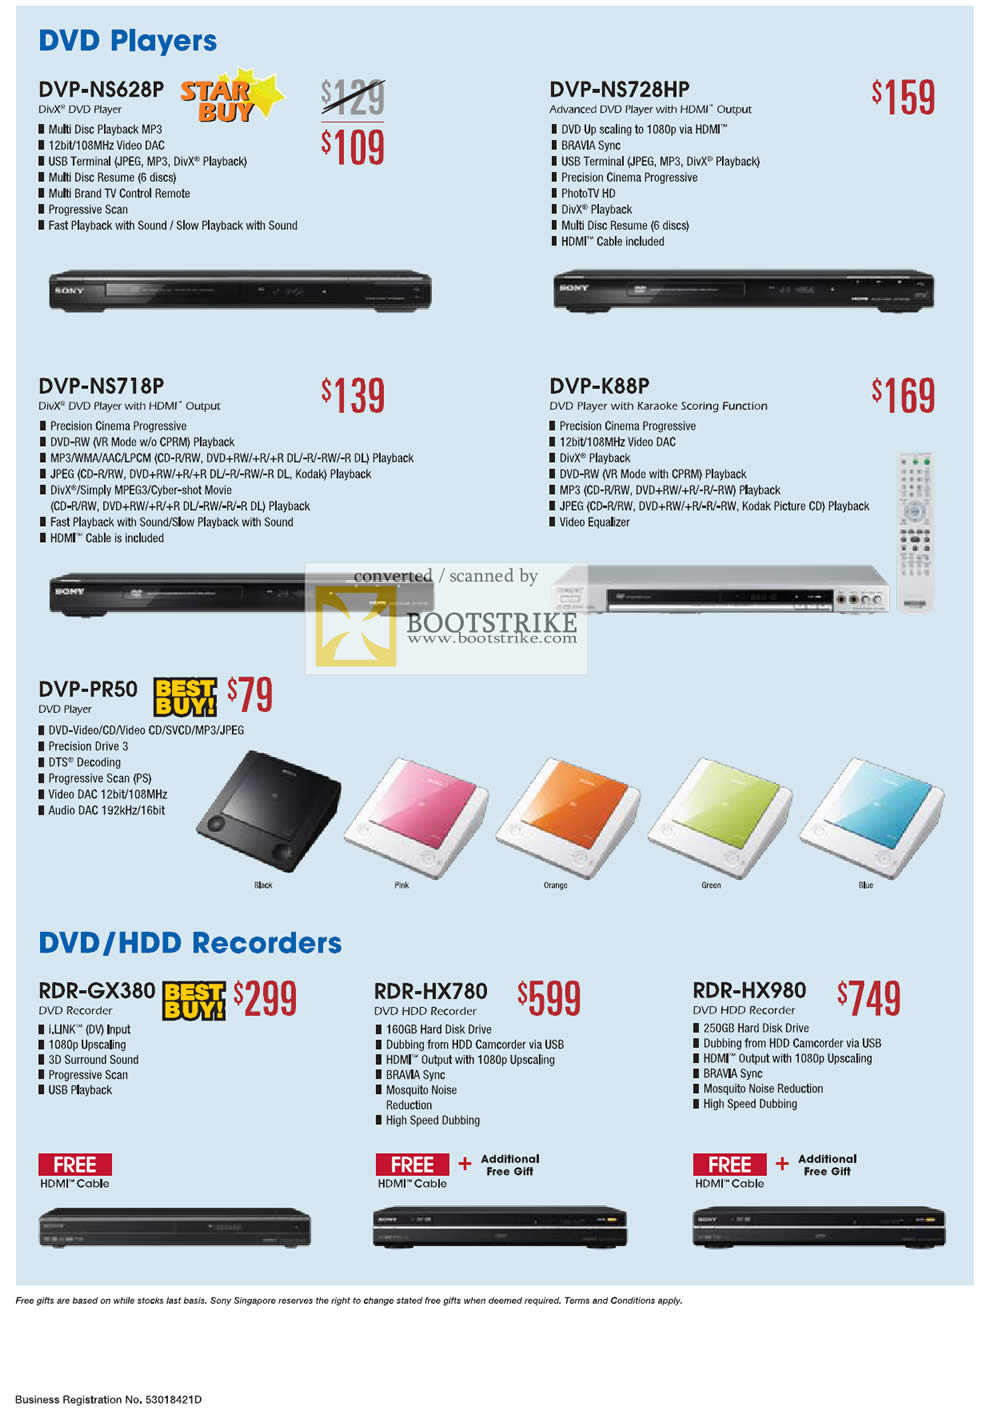 PC Show 2009 price list image brochure of Sony DVD Players DVD HDD Recorders DVP RDR